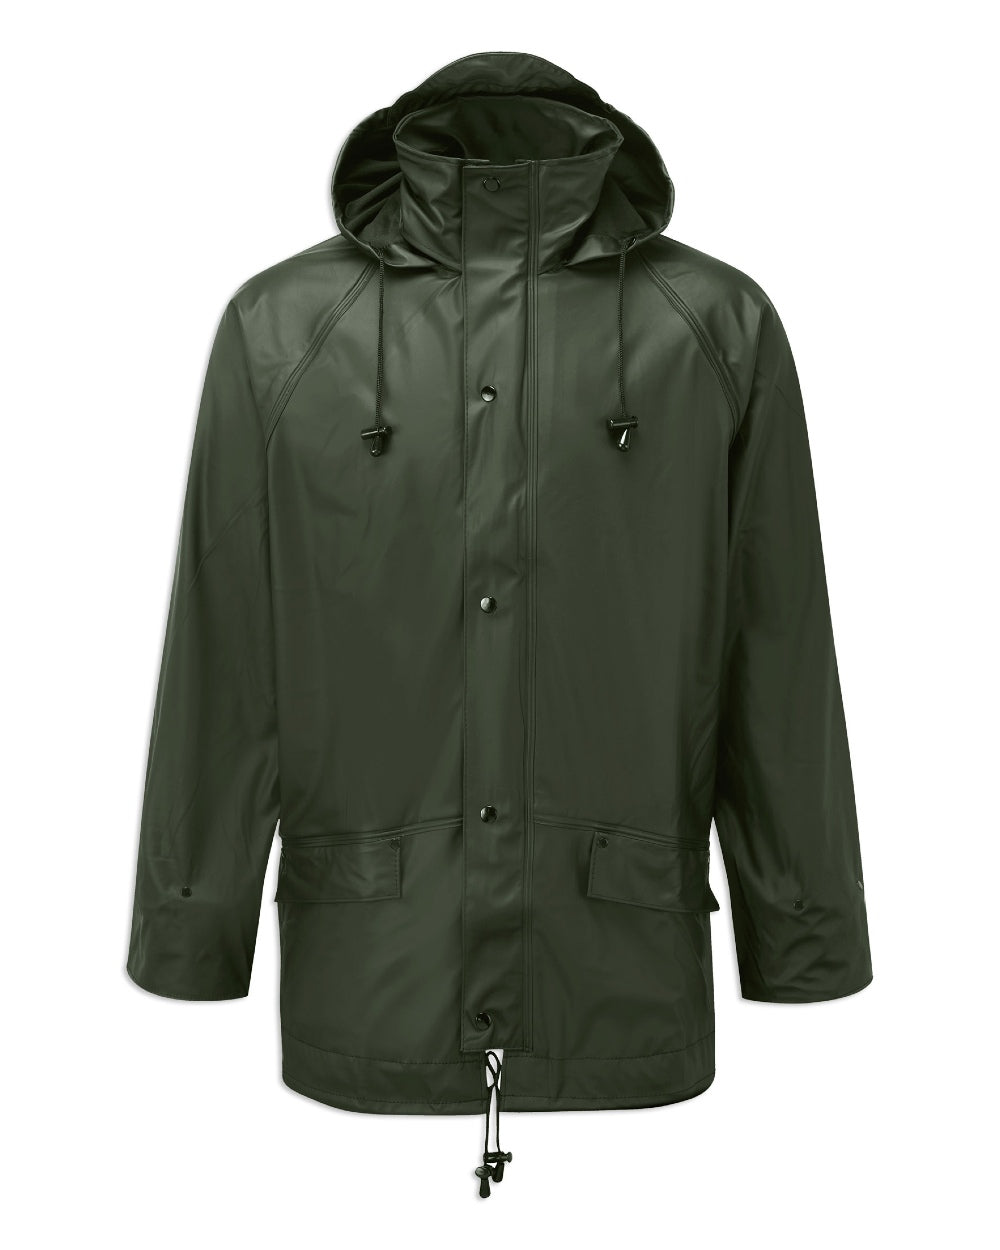 The Ultimate Guide to Construction Rain Gear - Styles, Materials